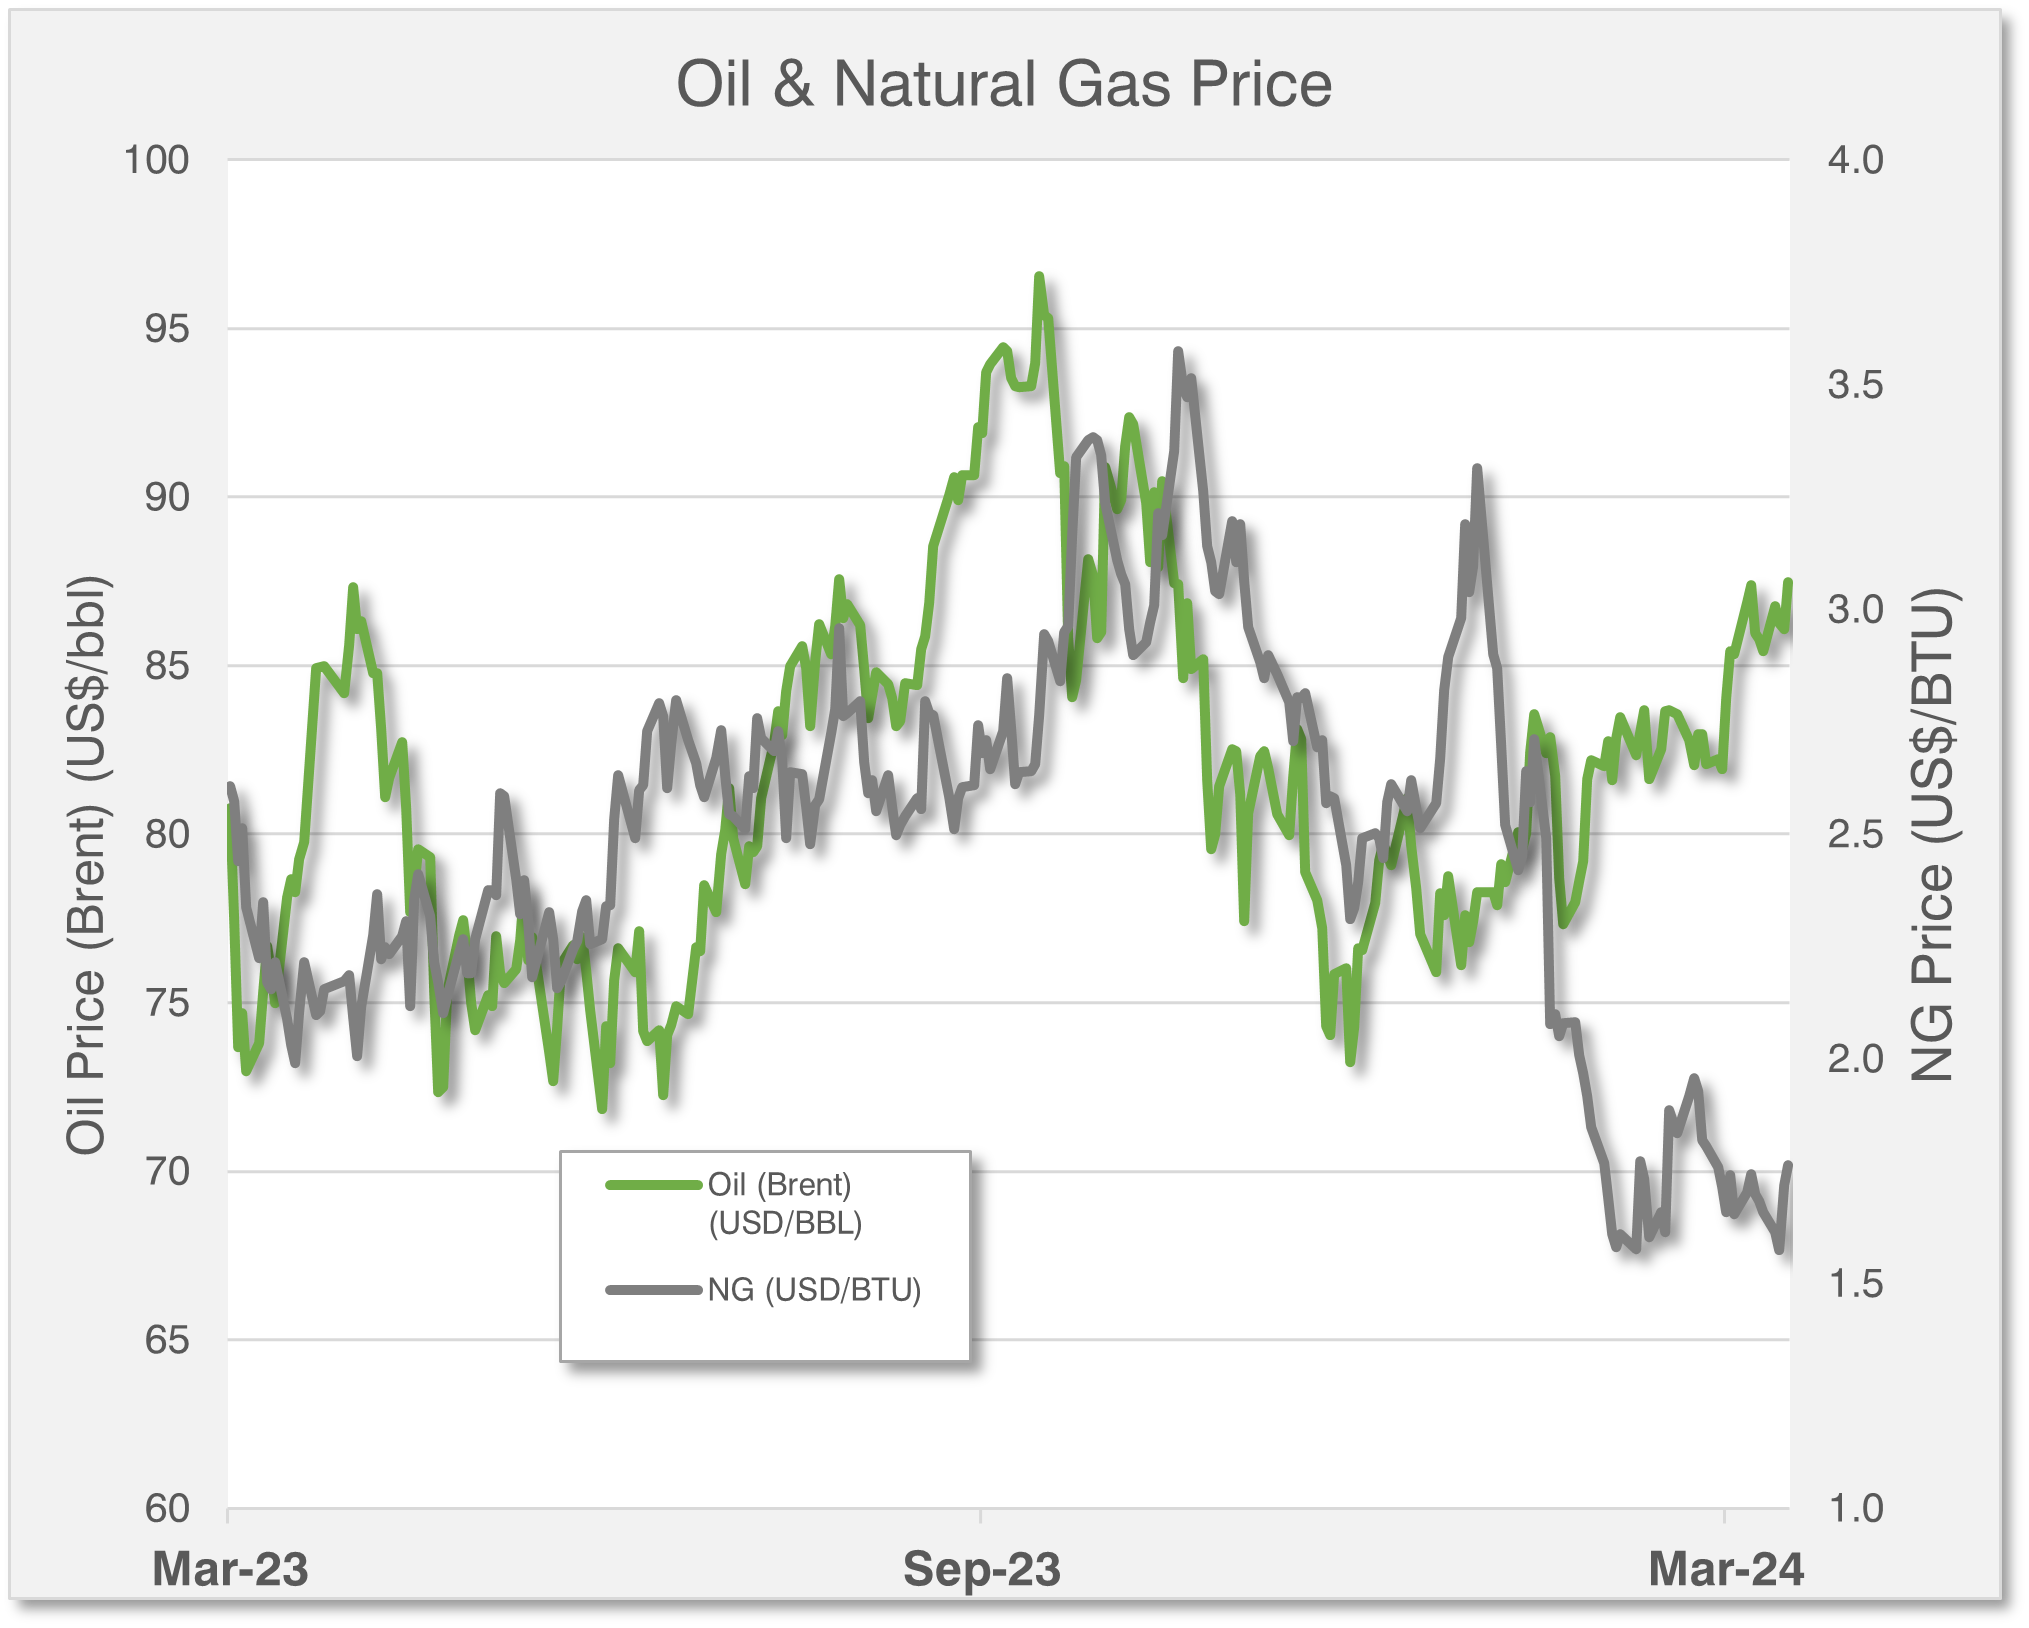 Oil (Brent) & Natural Gas Price Trend - March 2023 - March 2024